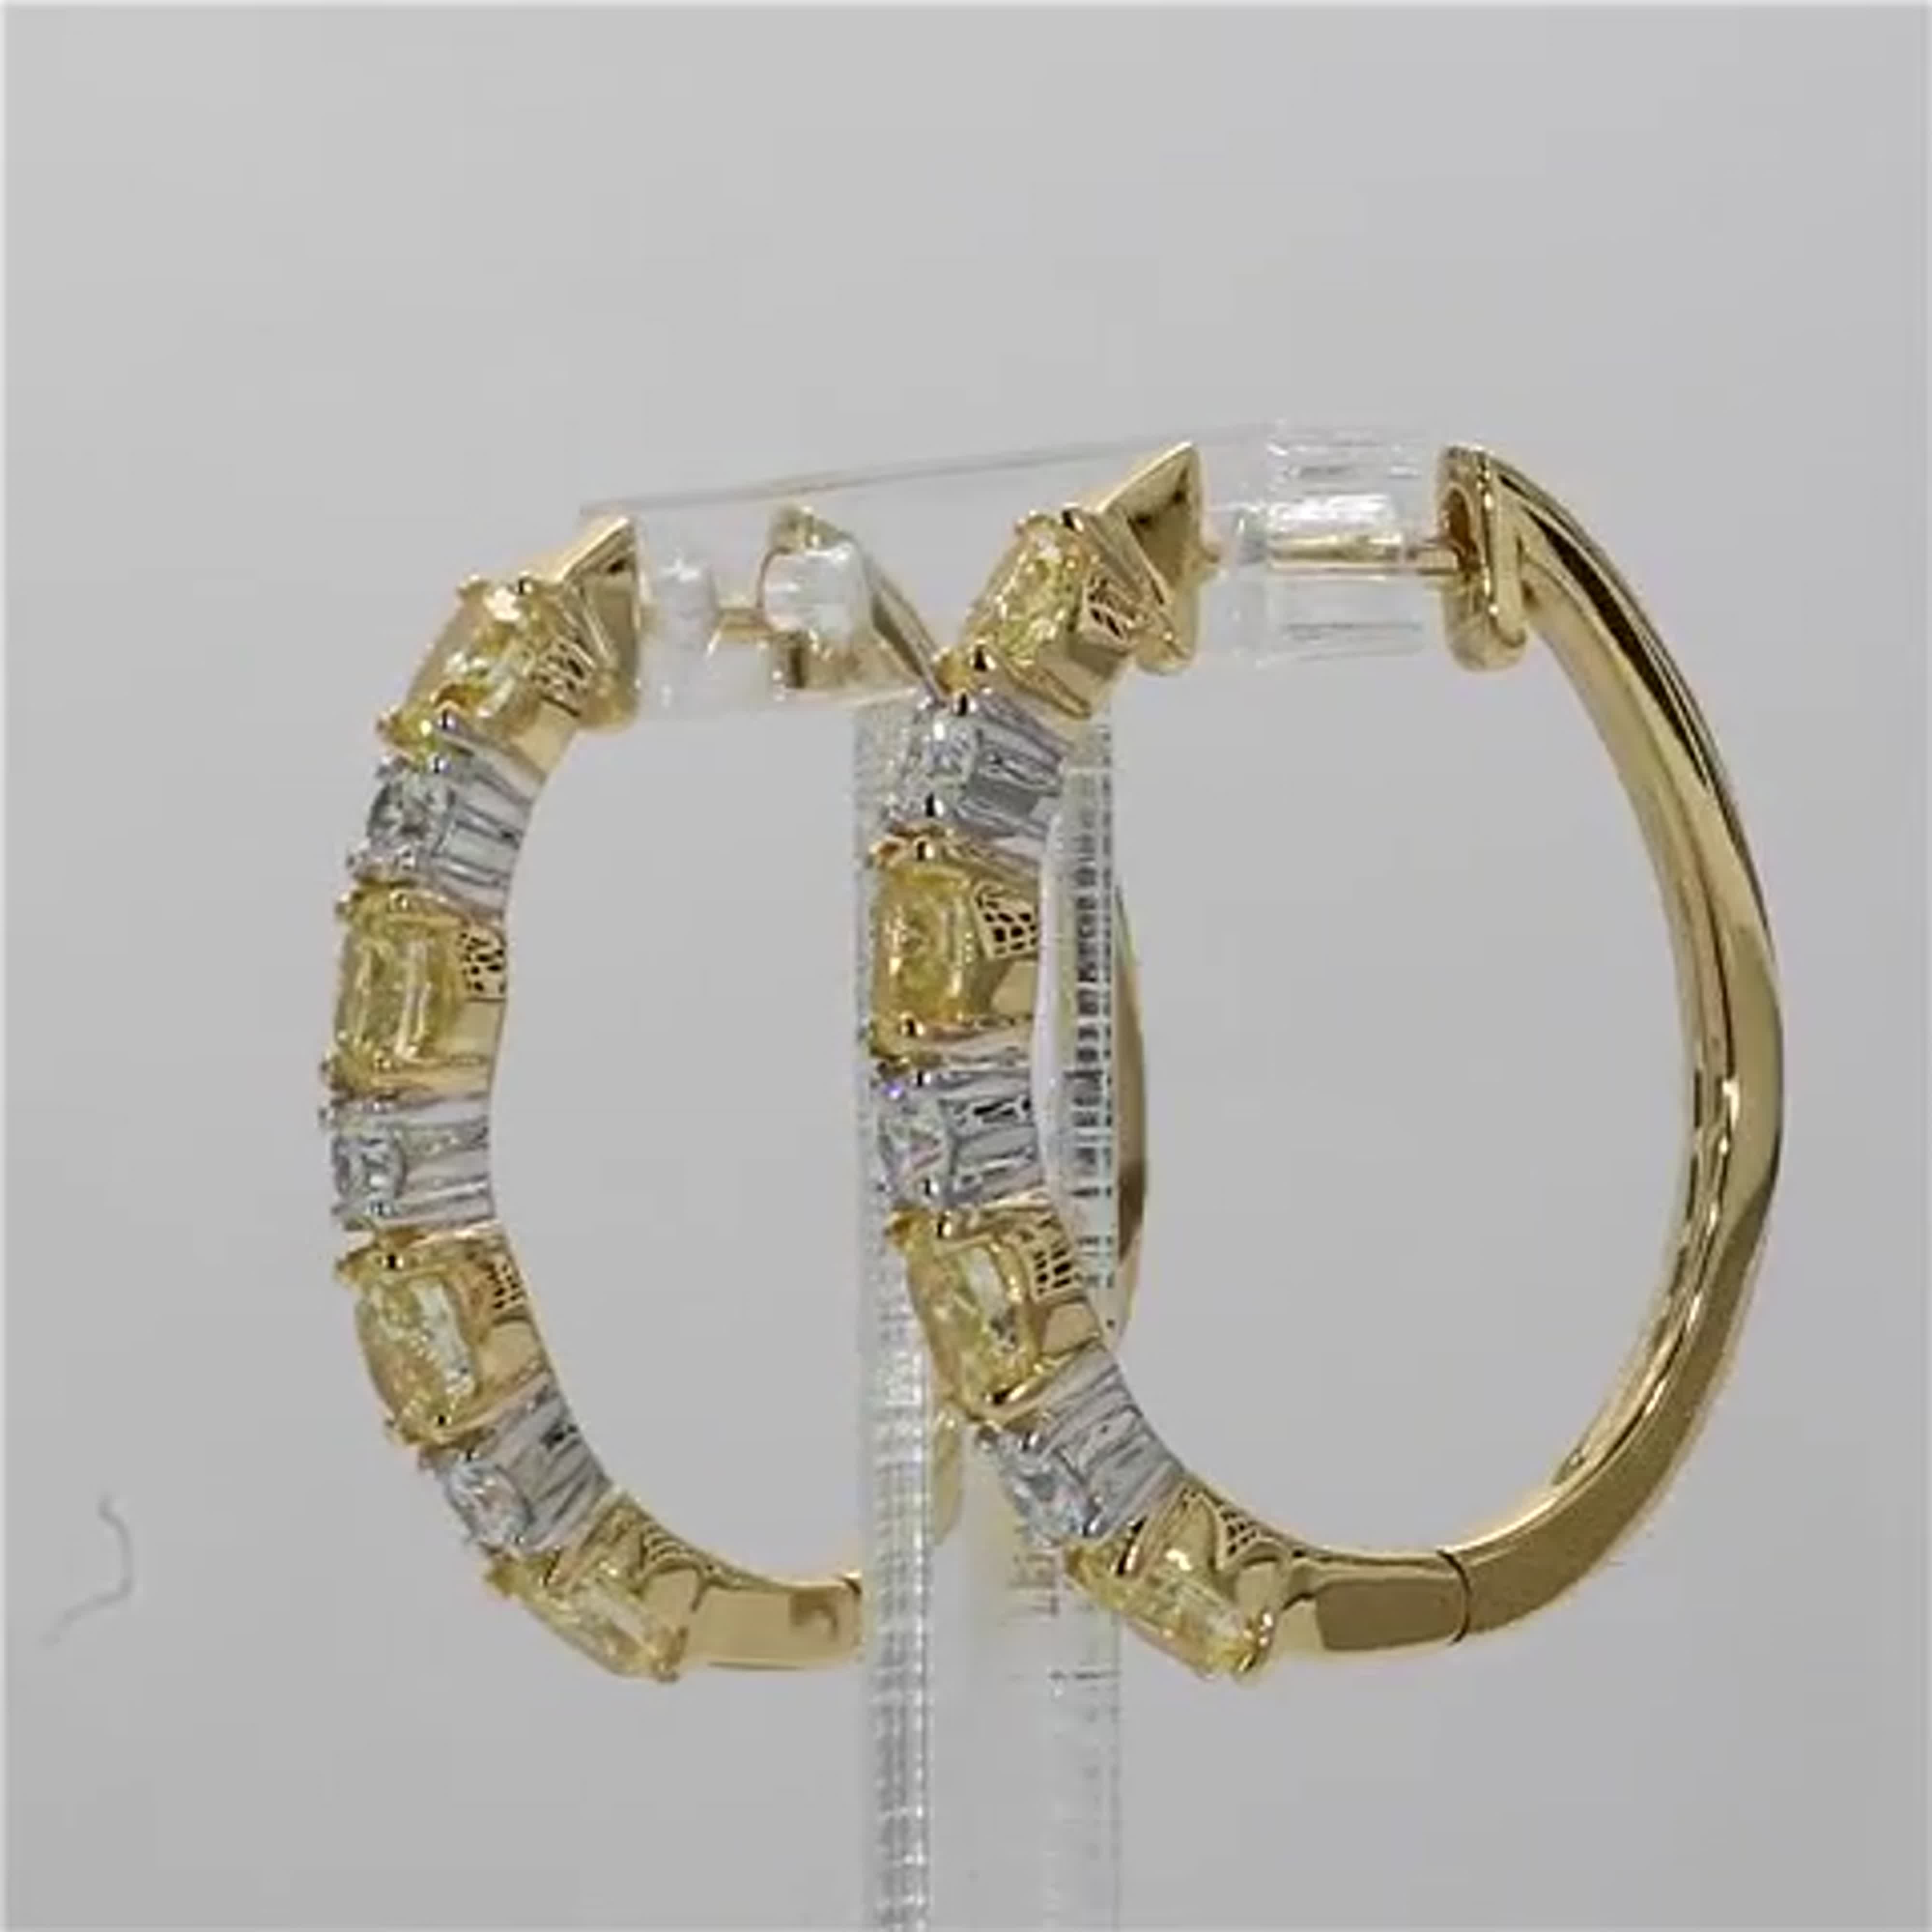 Natural Yellow Oval and White Diamond 2.41 Carat TW Gold Hoop Earrings